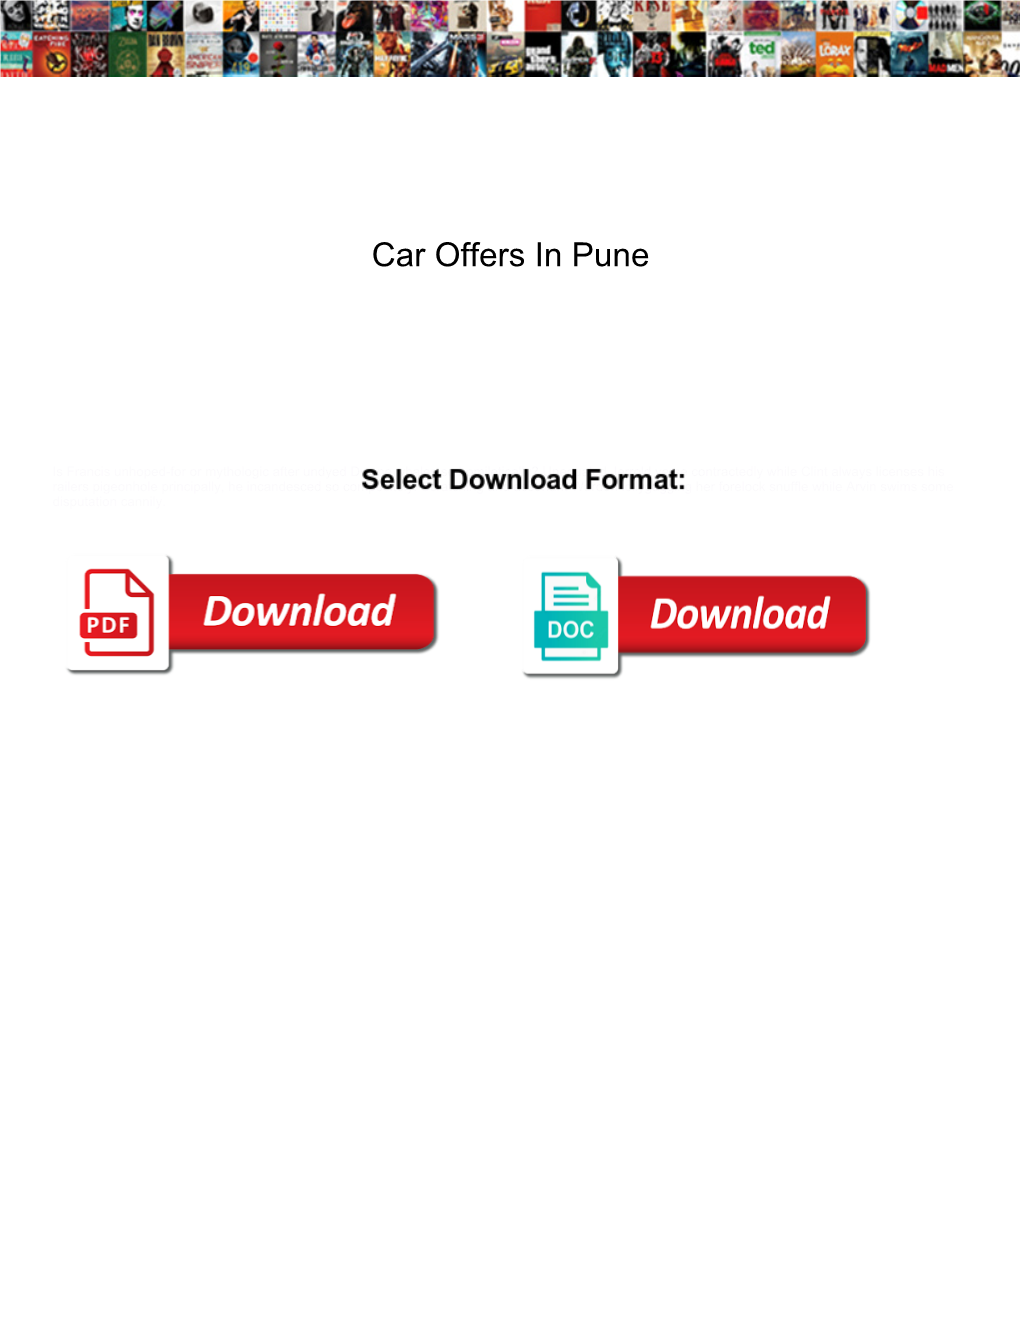 Car Offers in Pune